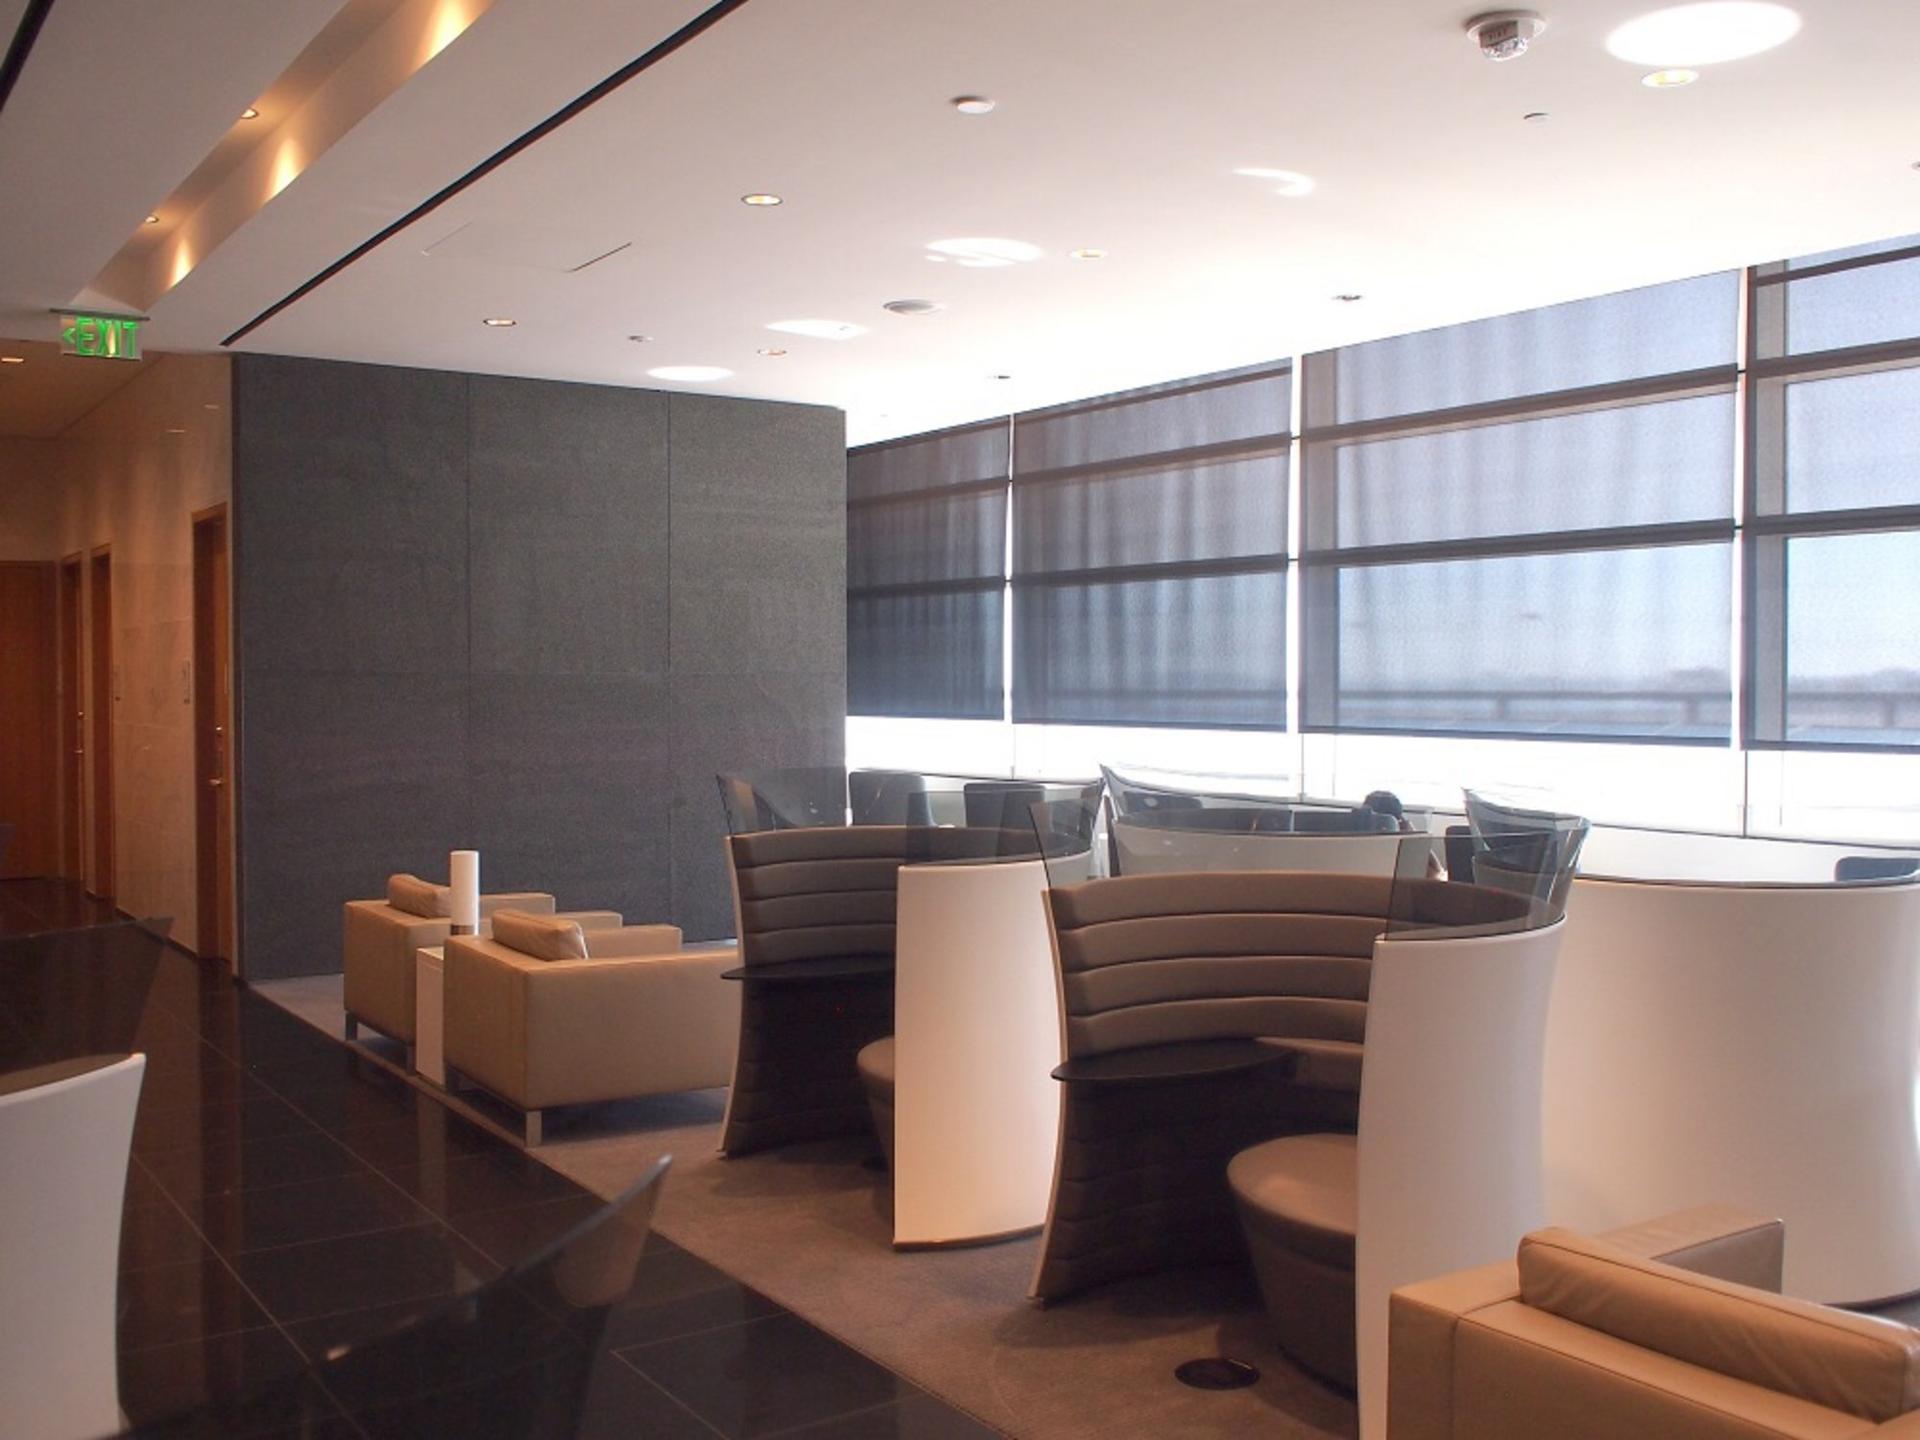 Cathay Pacific First and Business Class Lounge image 34 of 74